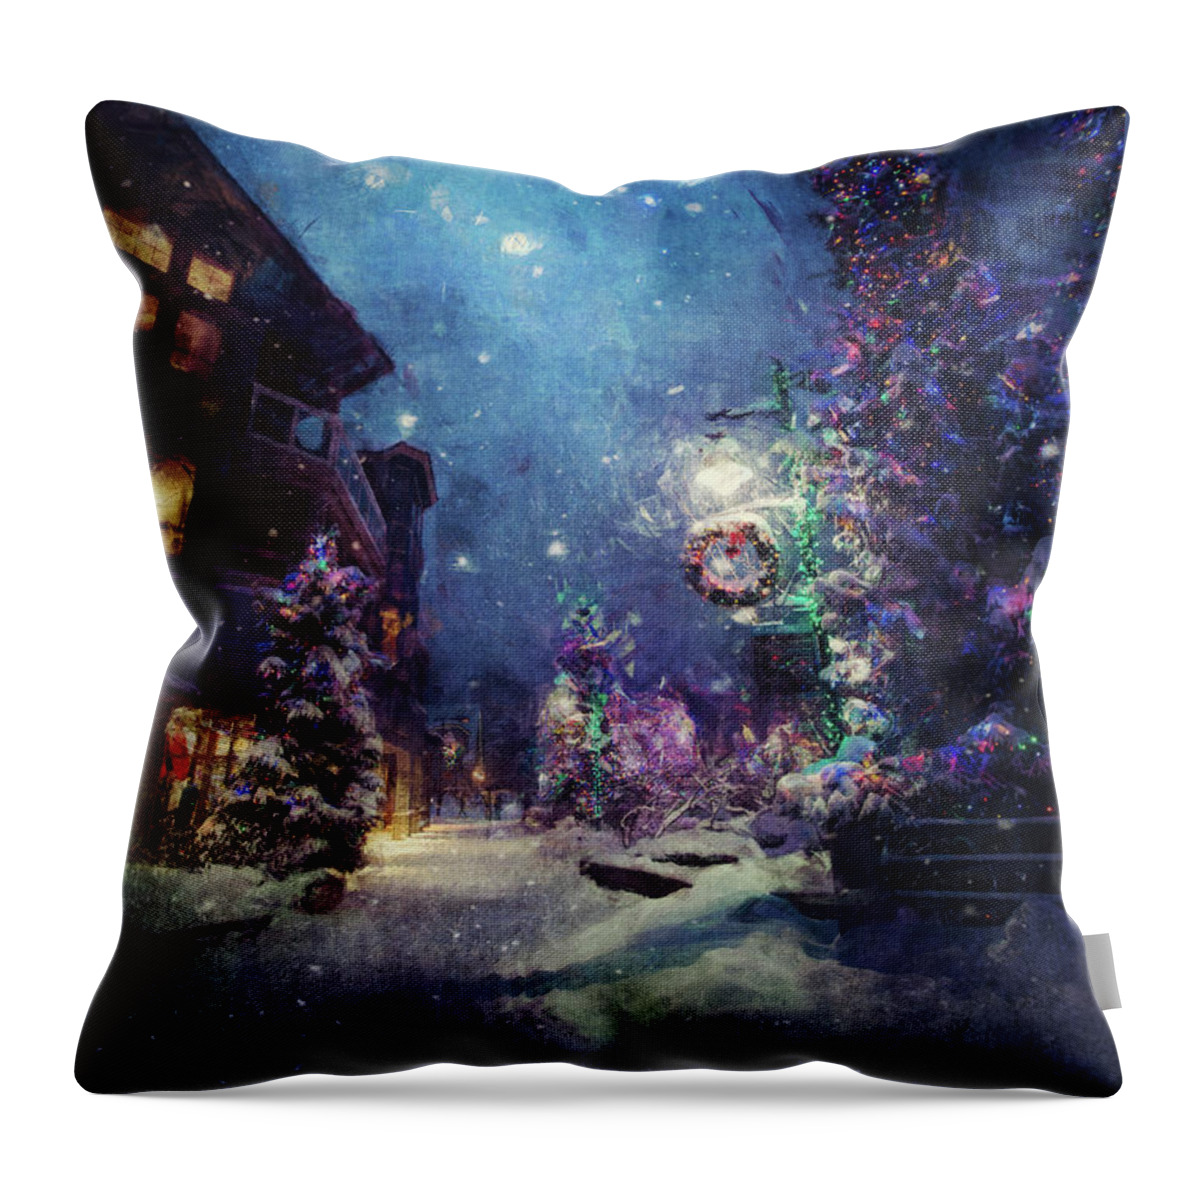 Christmas Throw Pillow featuring the digital art Season's Greetings by Phil Perkins